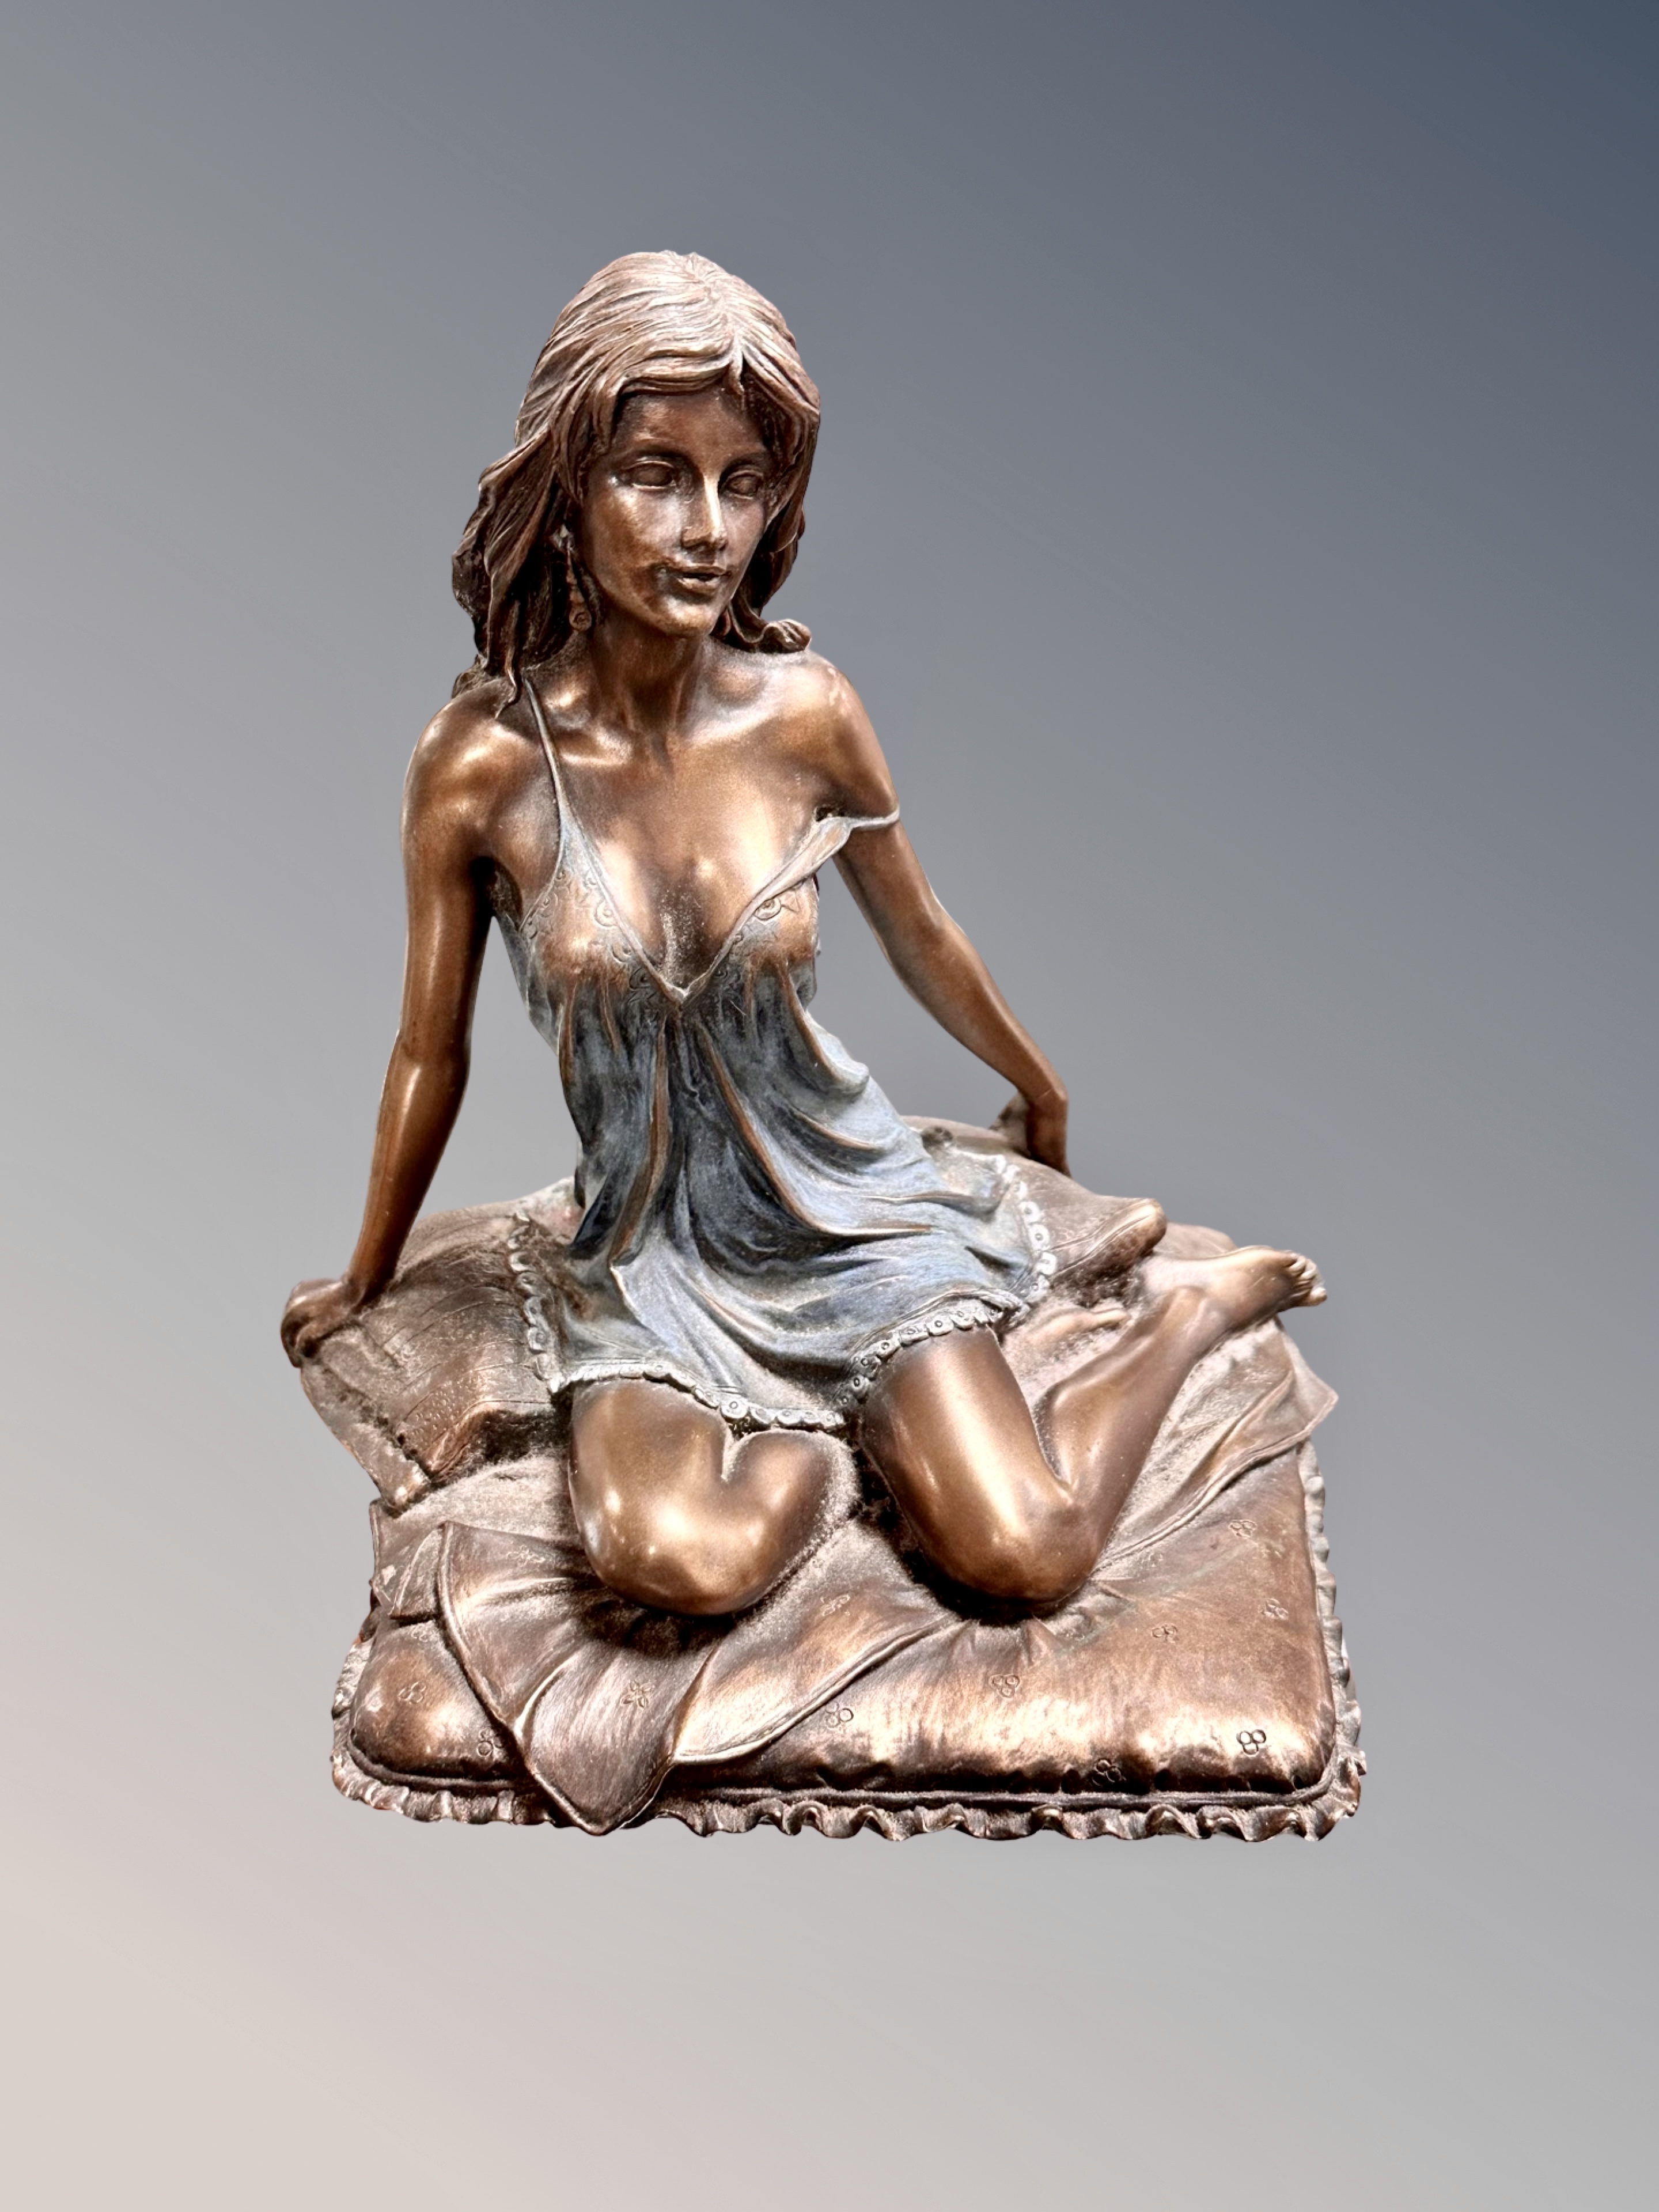 A bronzed figure of a scantily dressed female seated on cushions